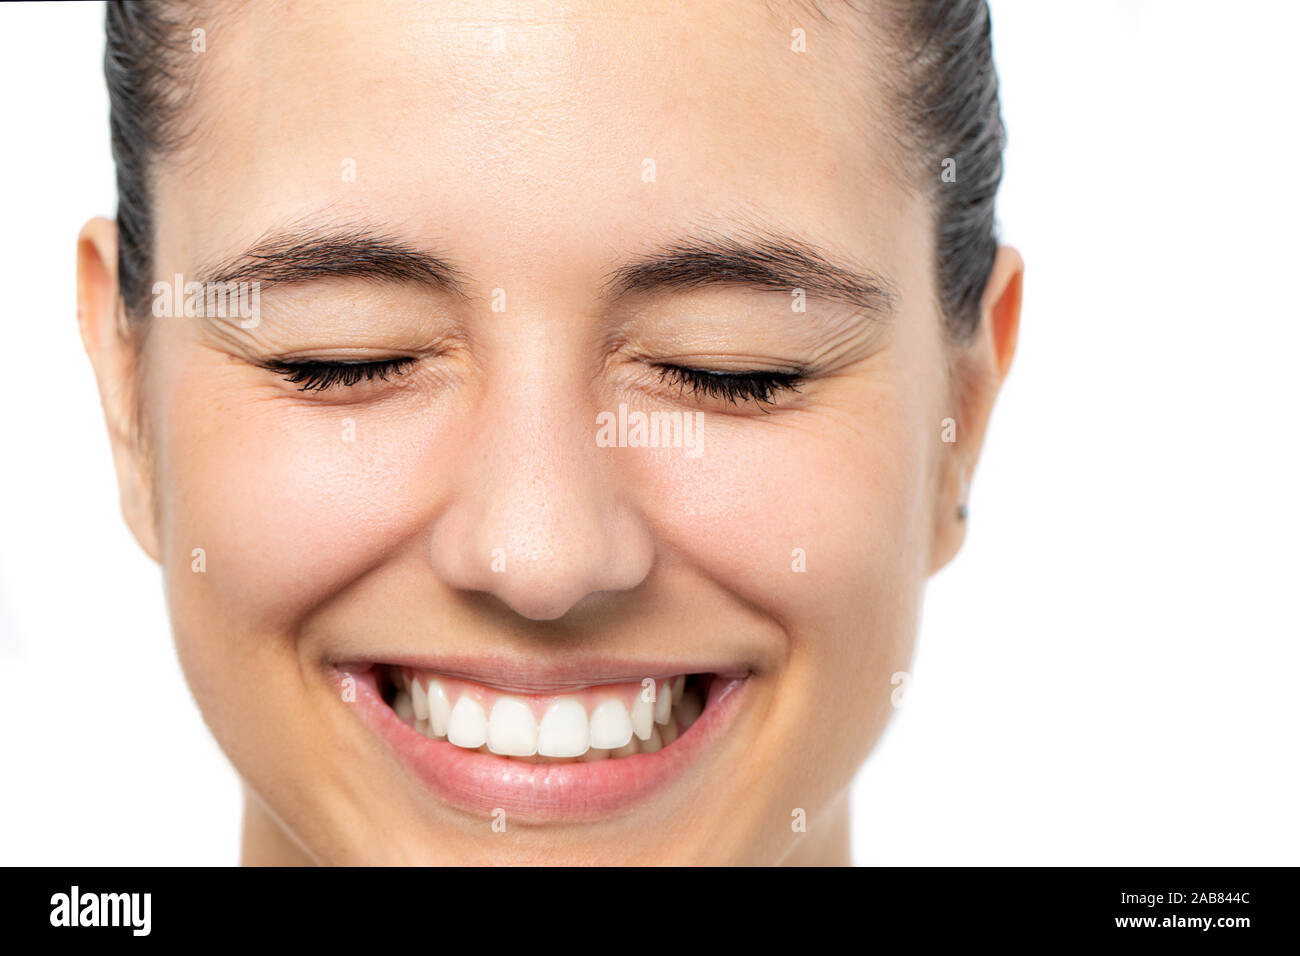 Close up face shot of woman with eyes closed tensing eyebrows. Isolated on white background. Stock Photo